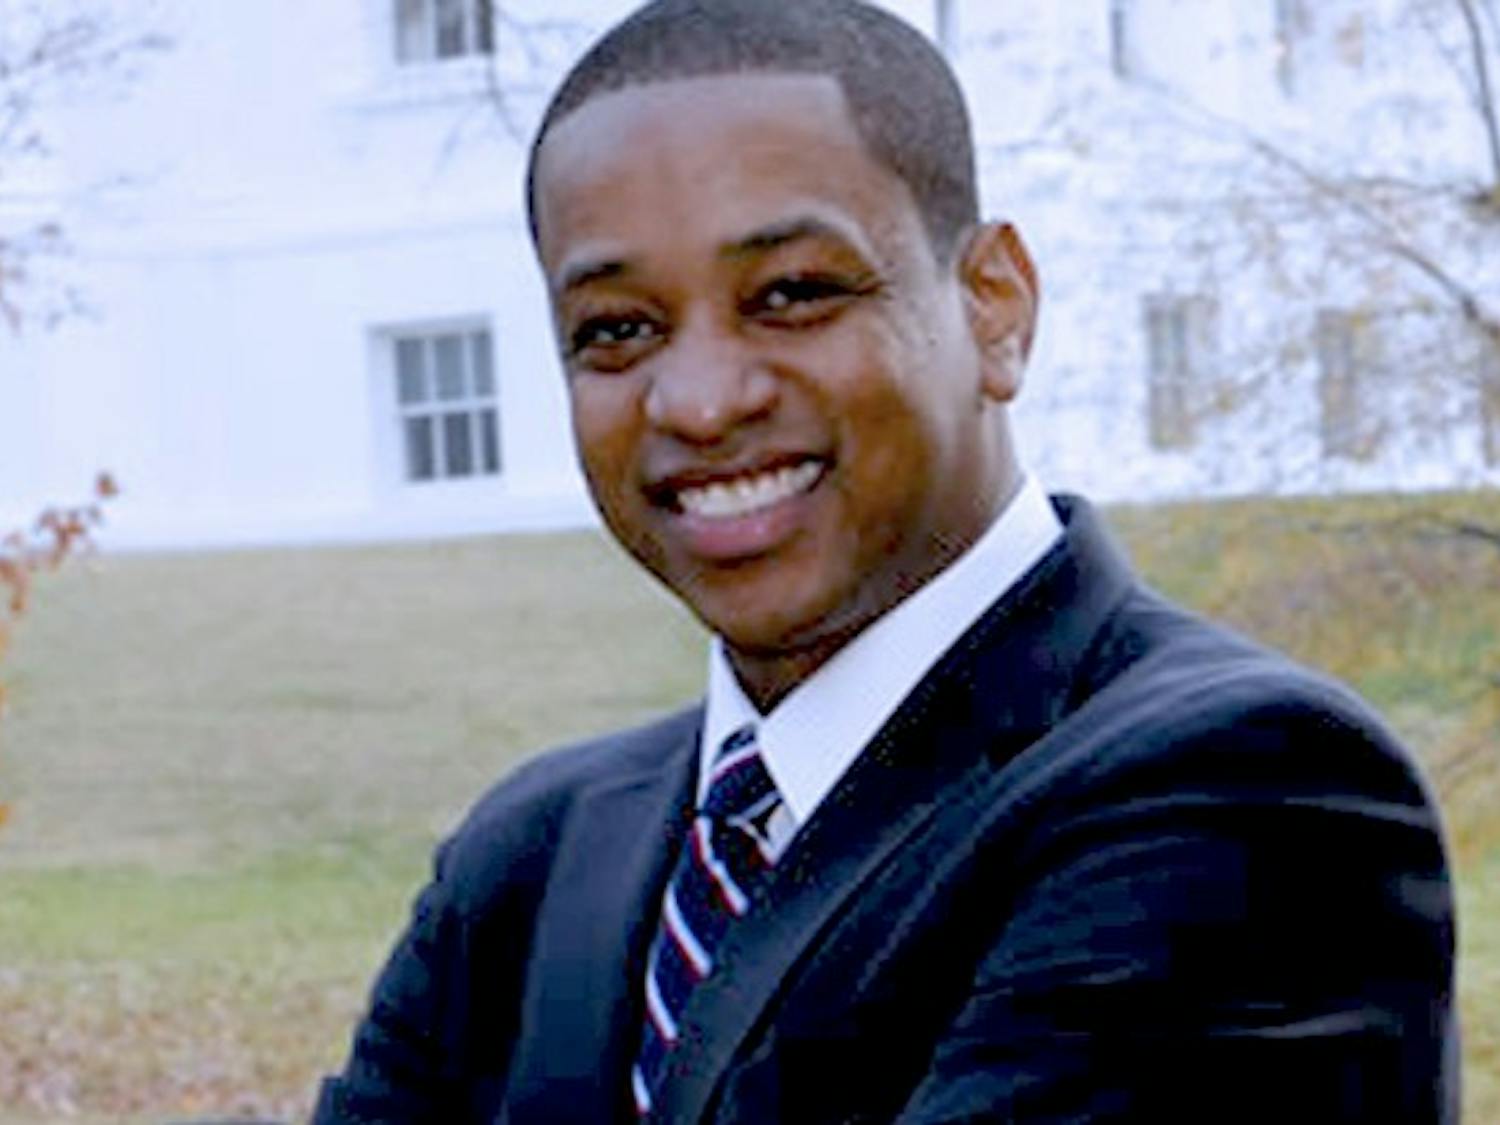 Former Young Trustee Justin Fairfax, Trinity ’00, is a candidate for the Attorney General of the Commonwealth of Virginia.